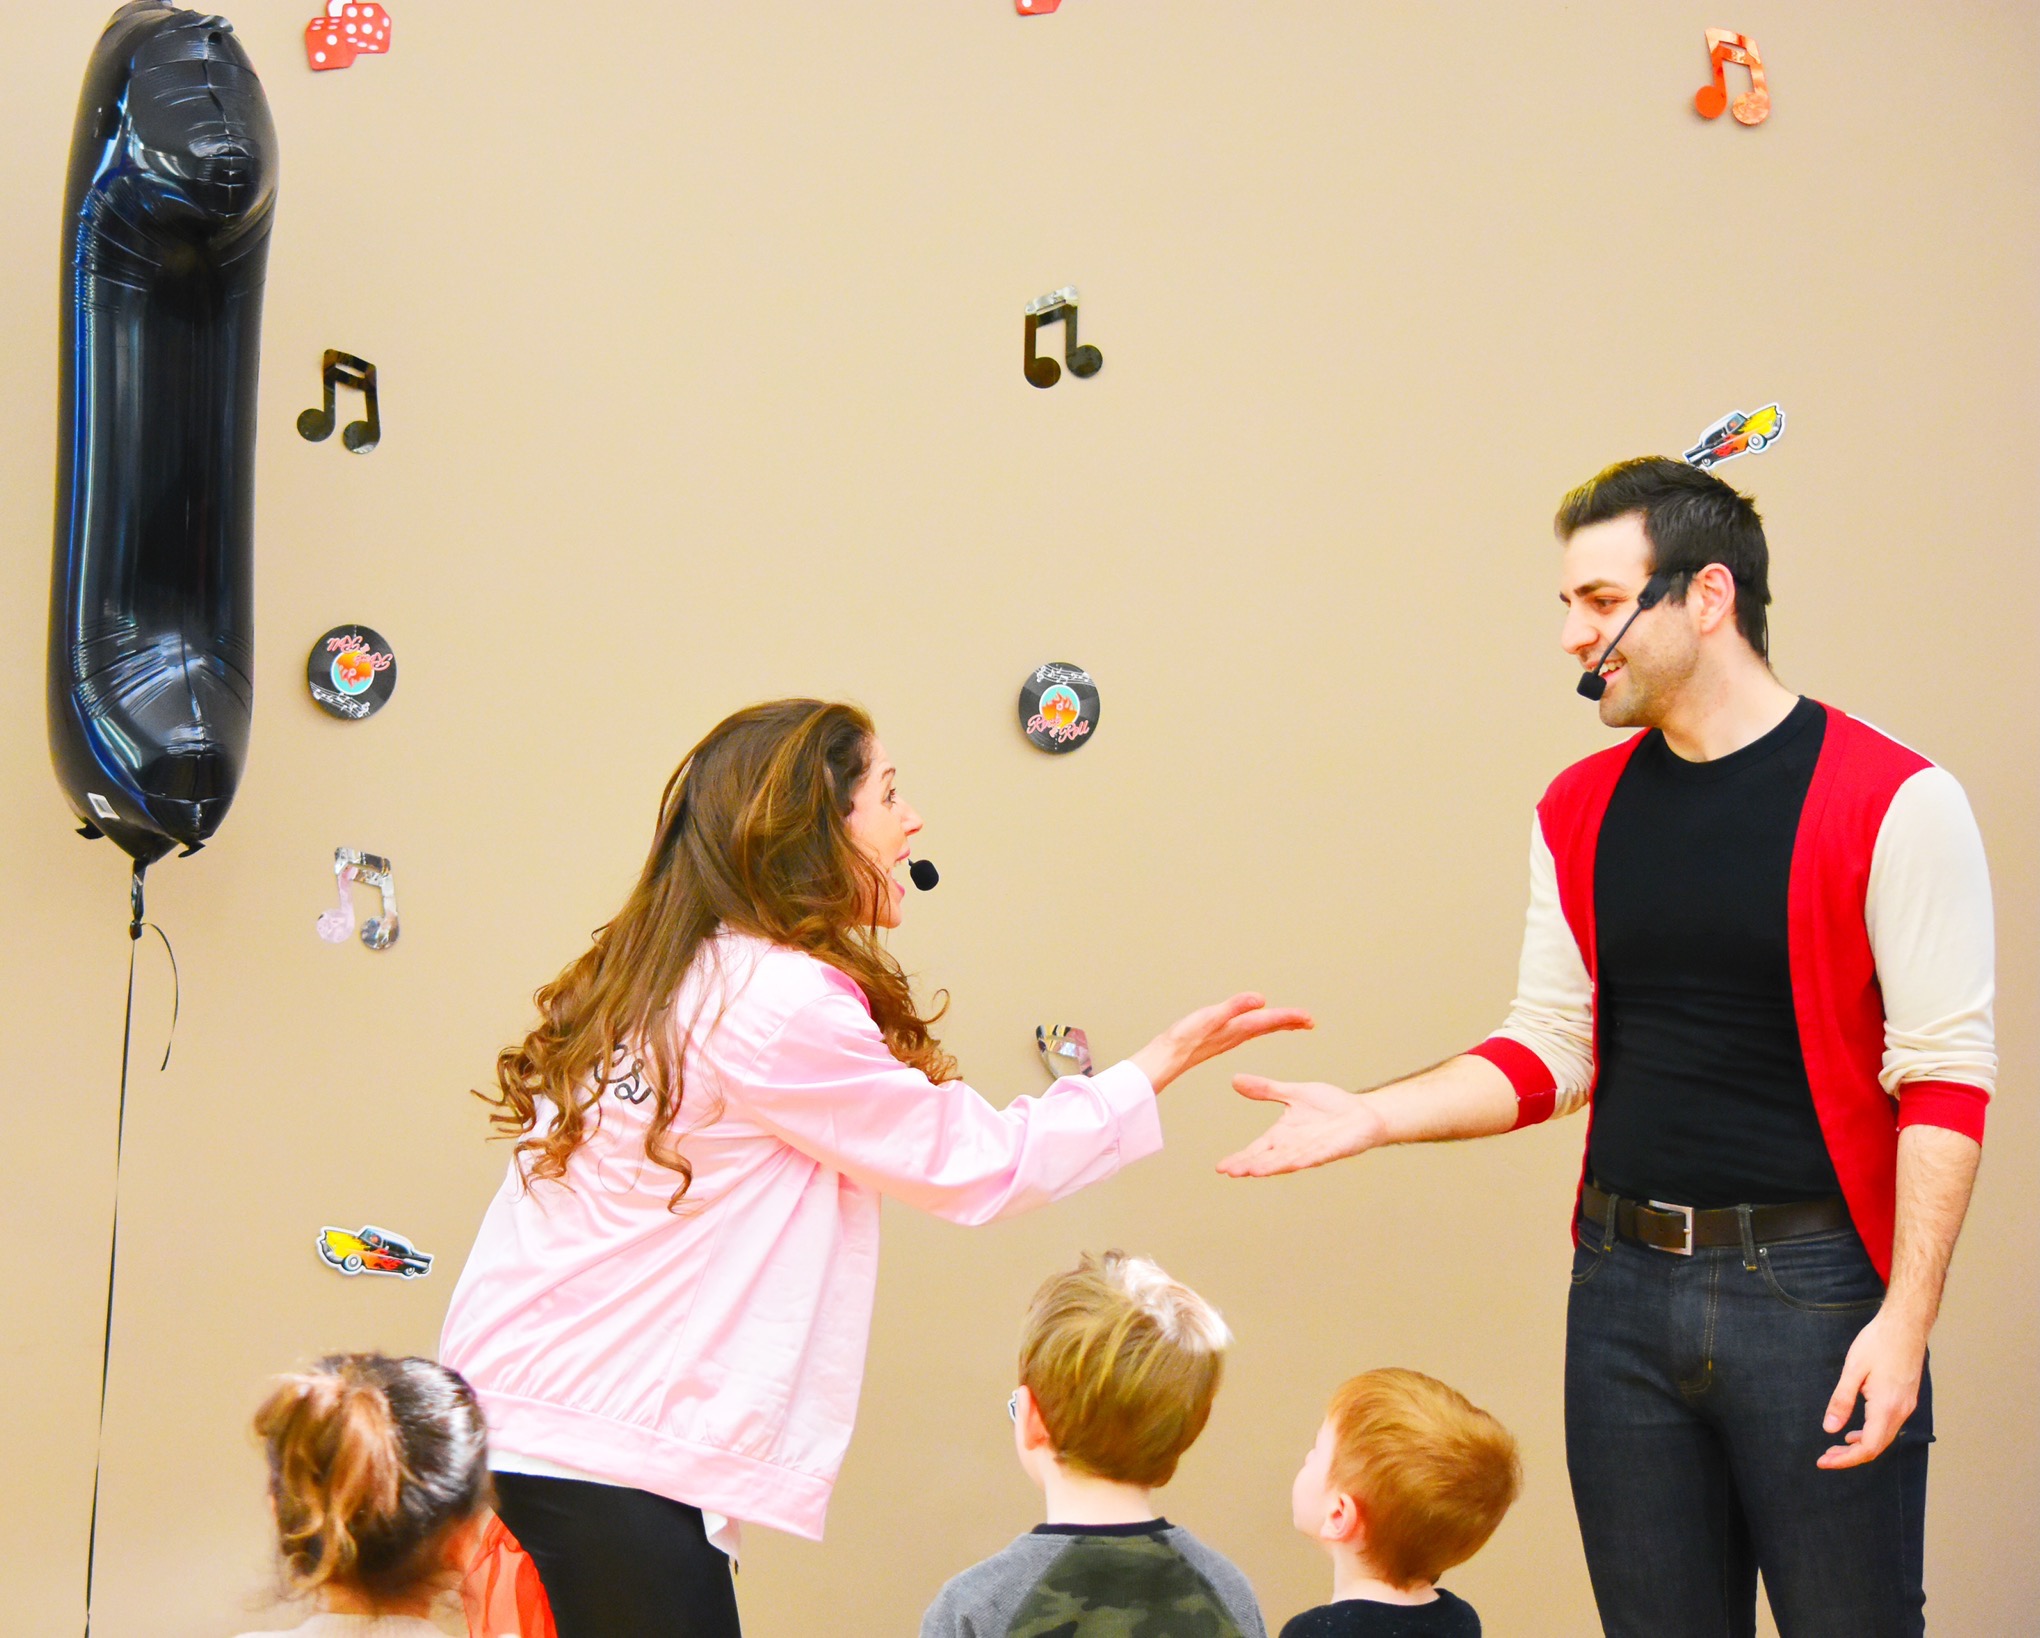 Levi's Grease-Themed FIRST Birthday Party // I Adore What I Love Blog // www.iadorewhatilove.com #iadorewhatilove